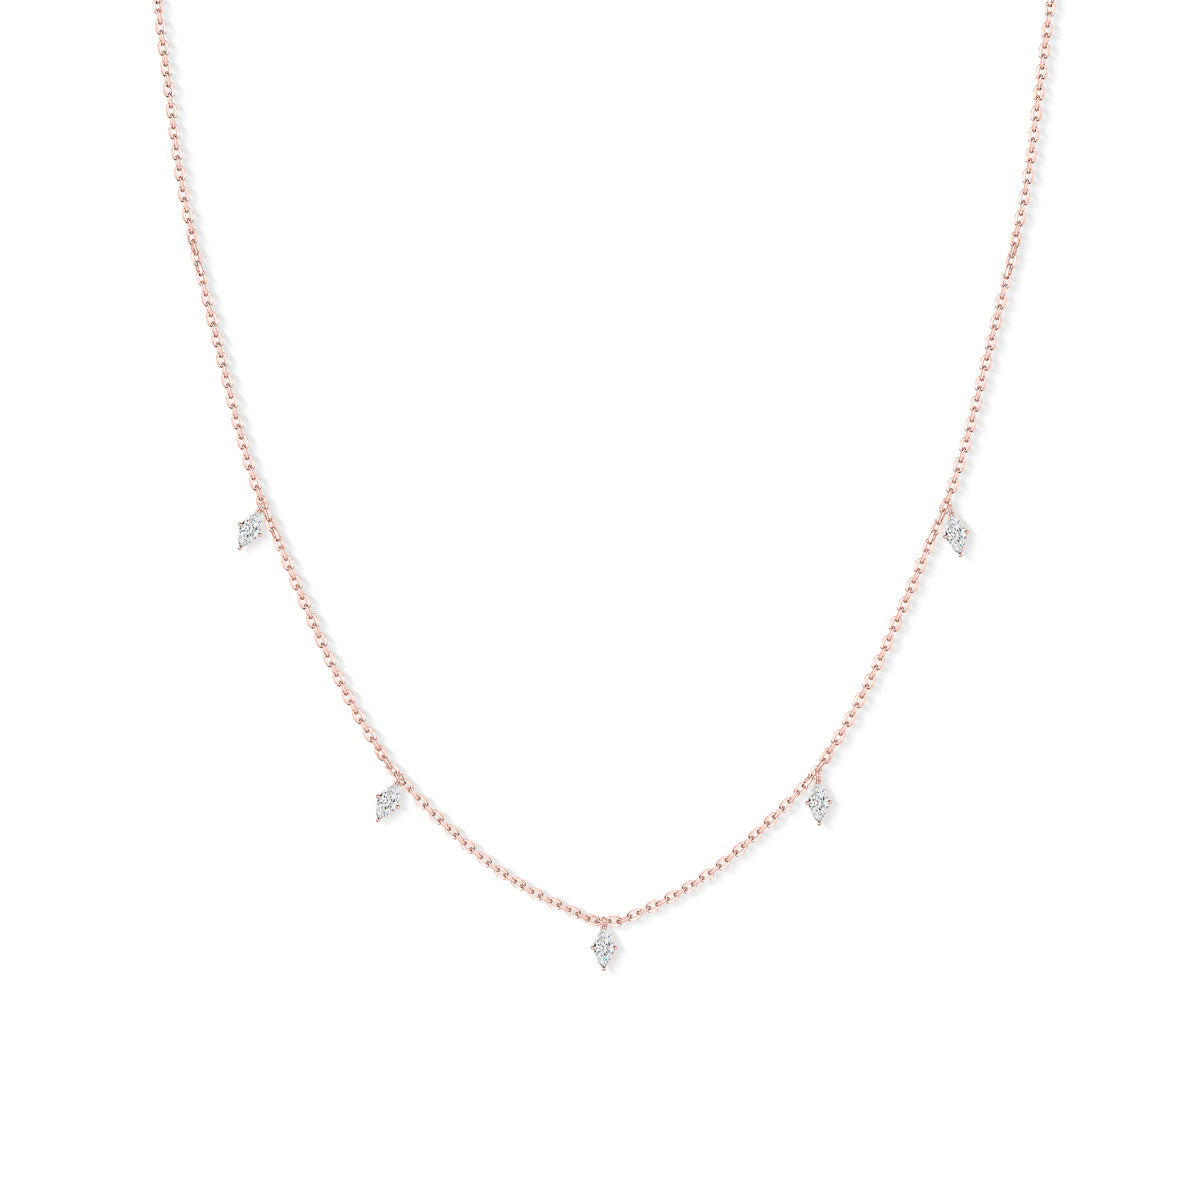 Cute rose gold studded chain necklace